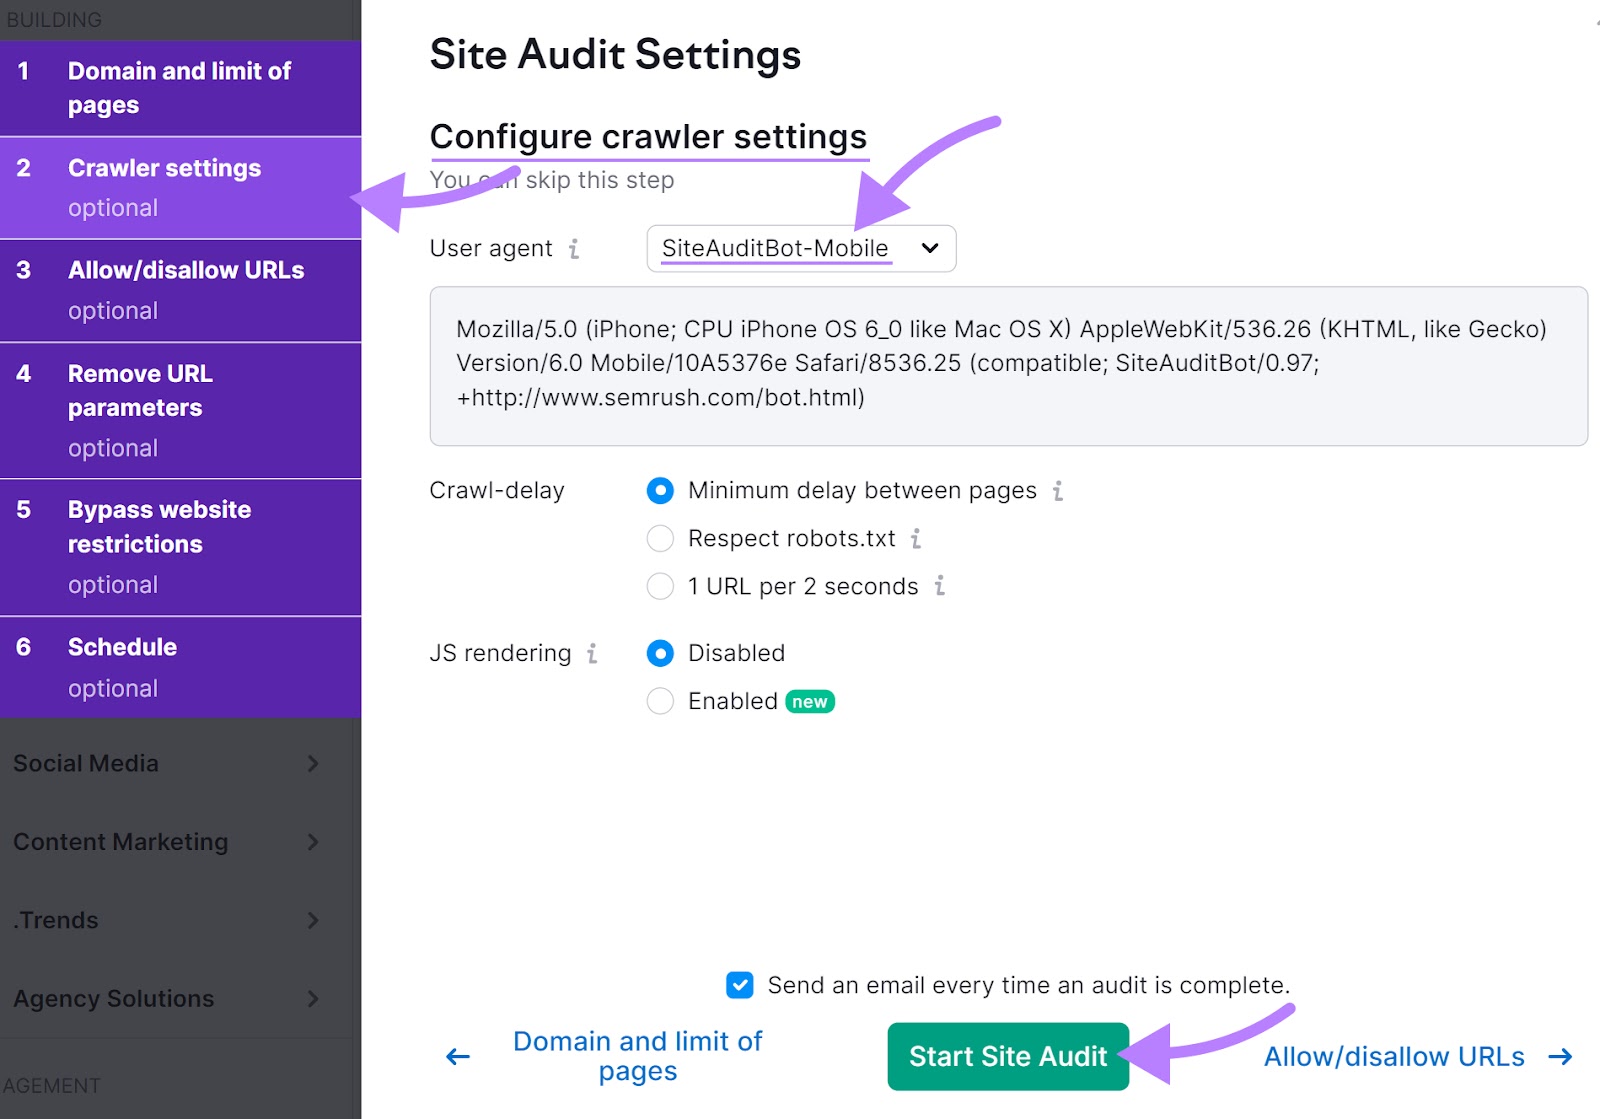 "Configure crawler settings" section of Site Audit Settings